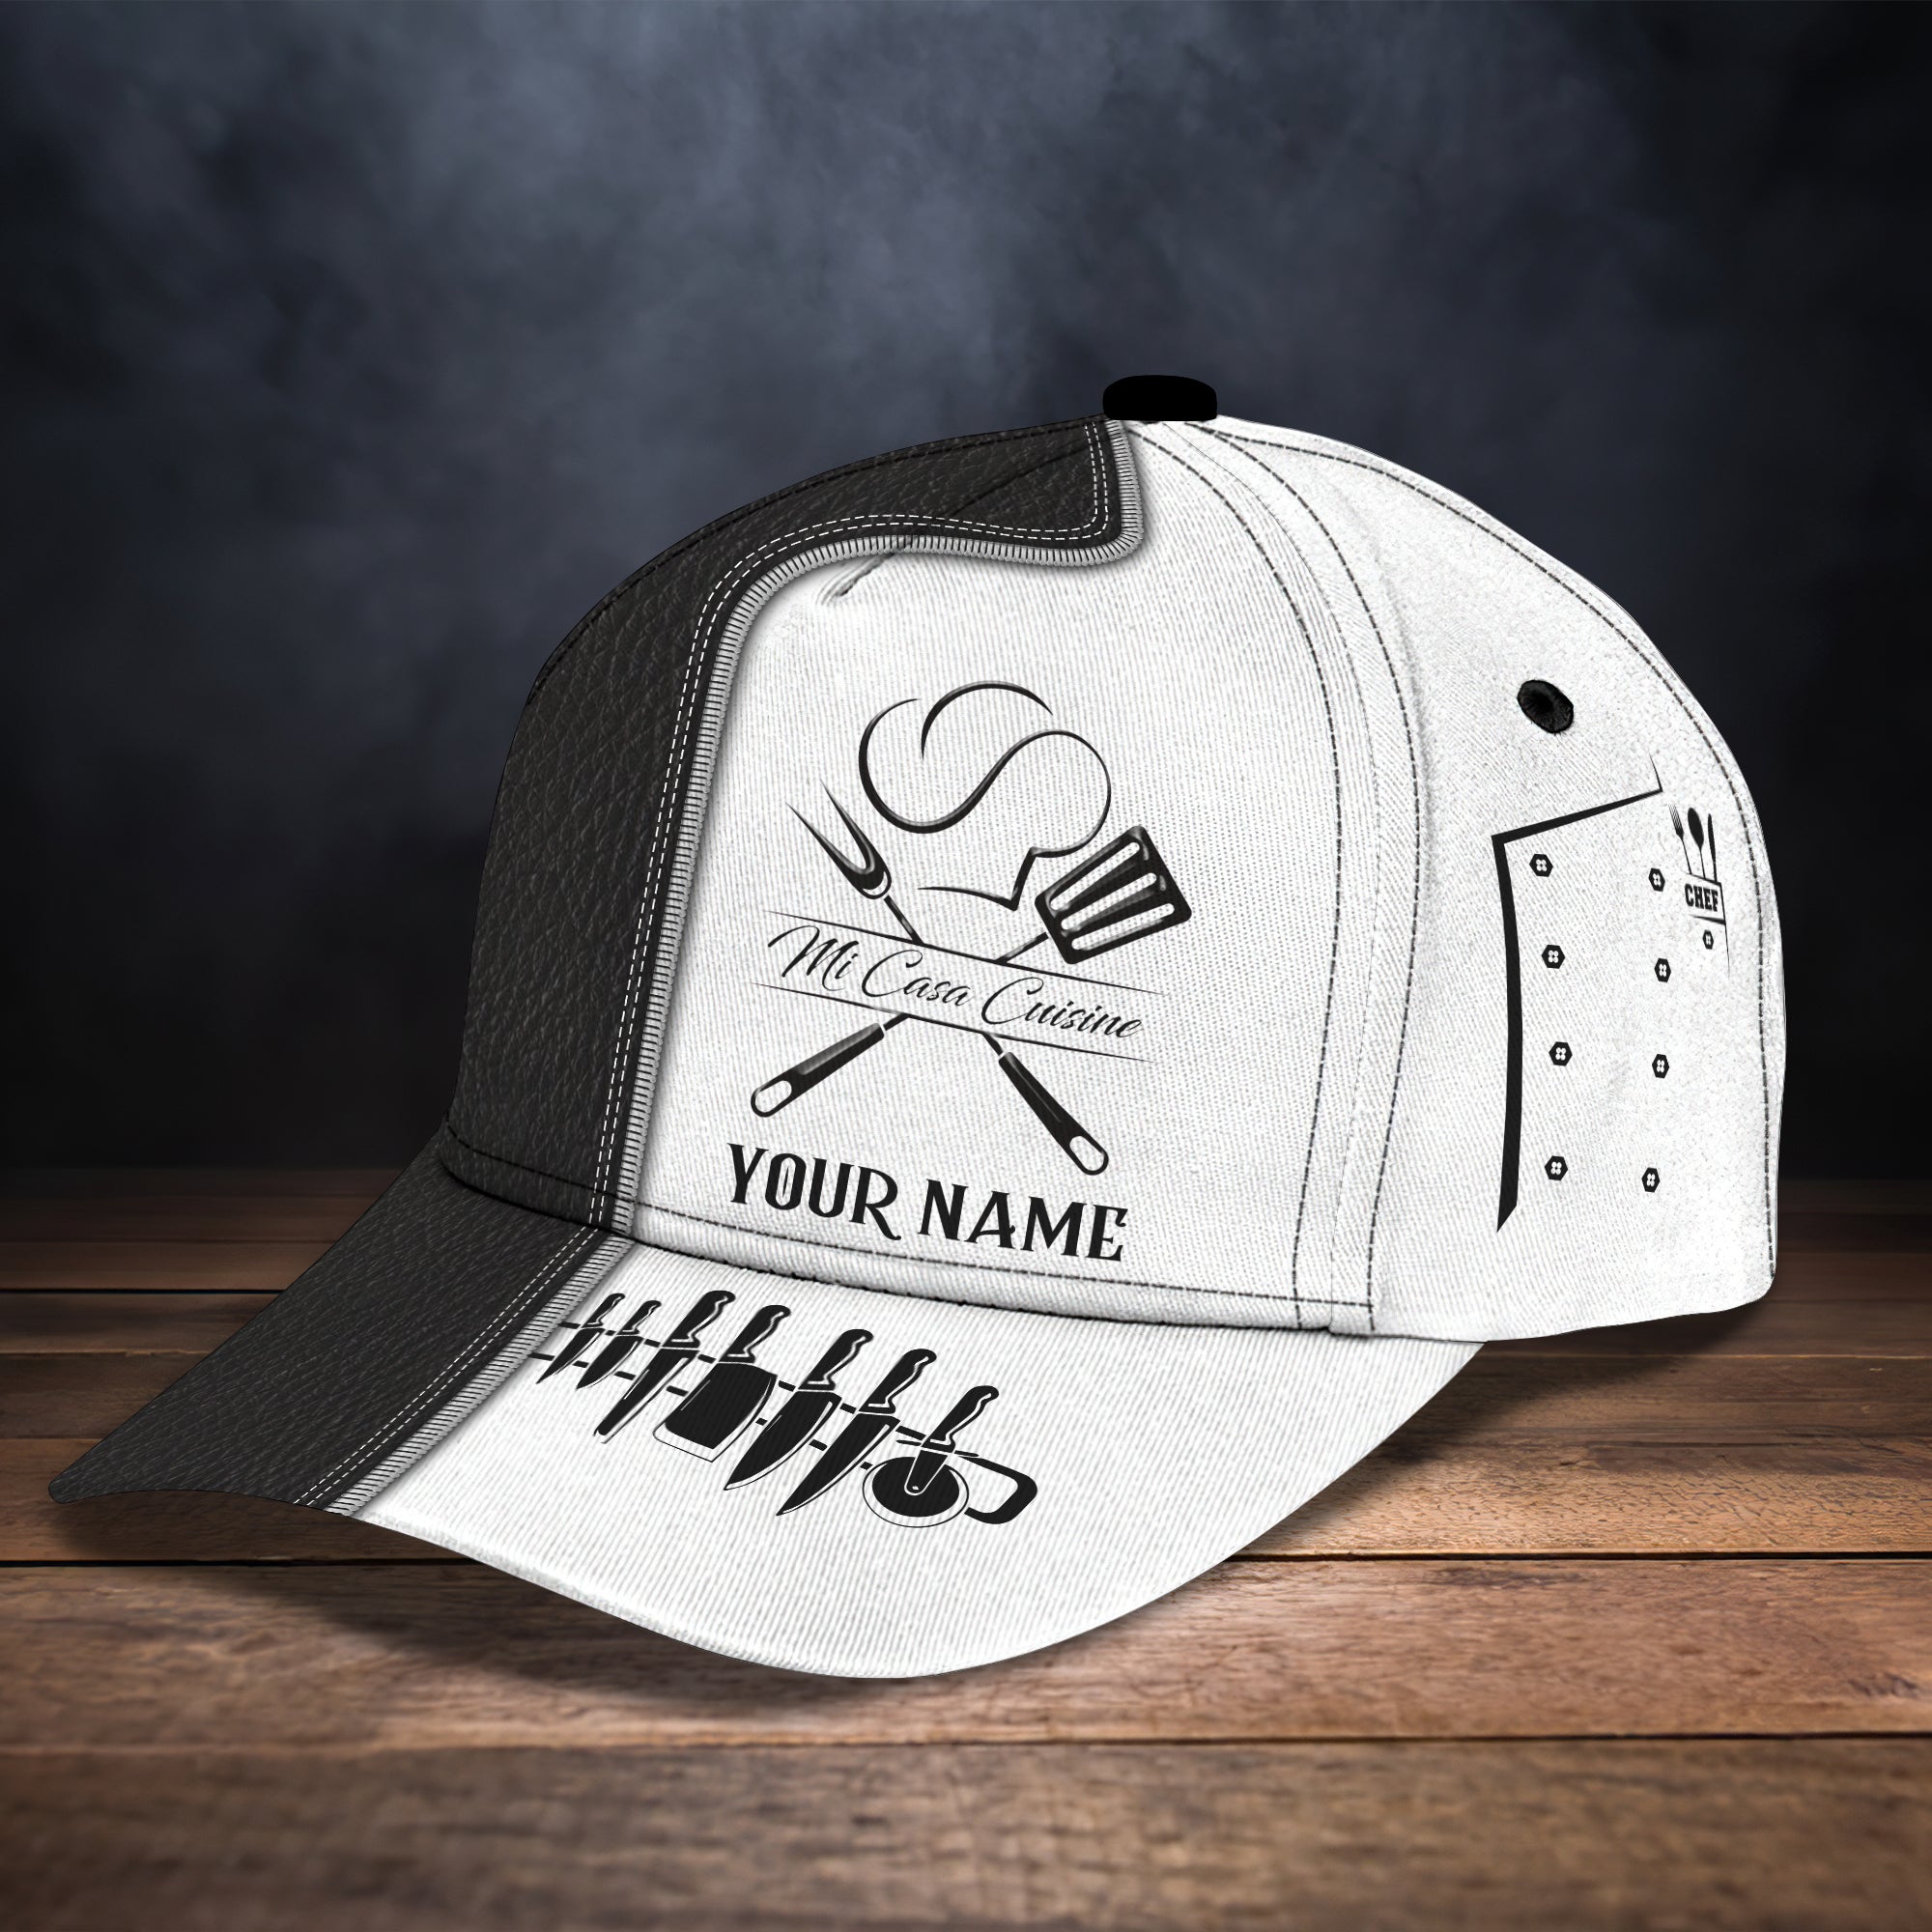 RINC98 - Personalized Name Cap - Chef06